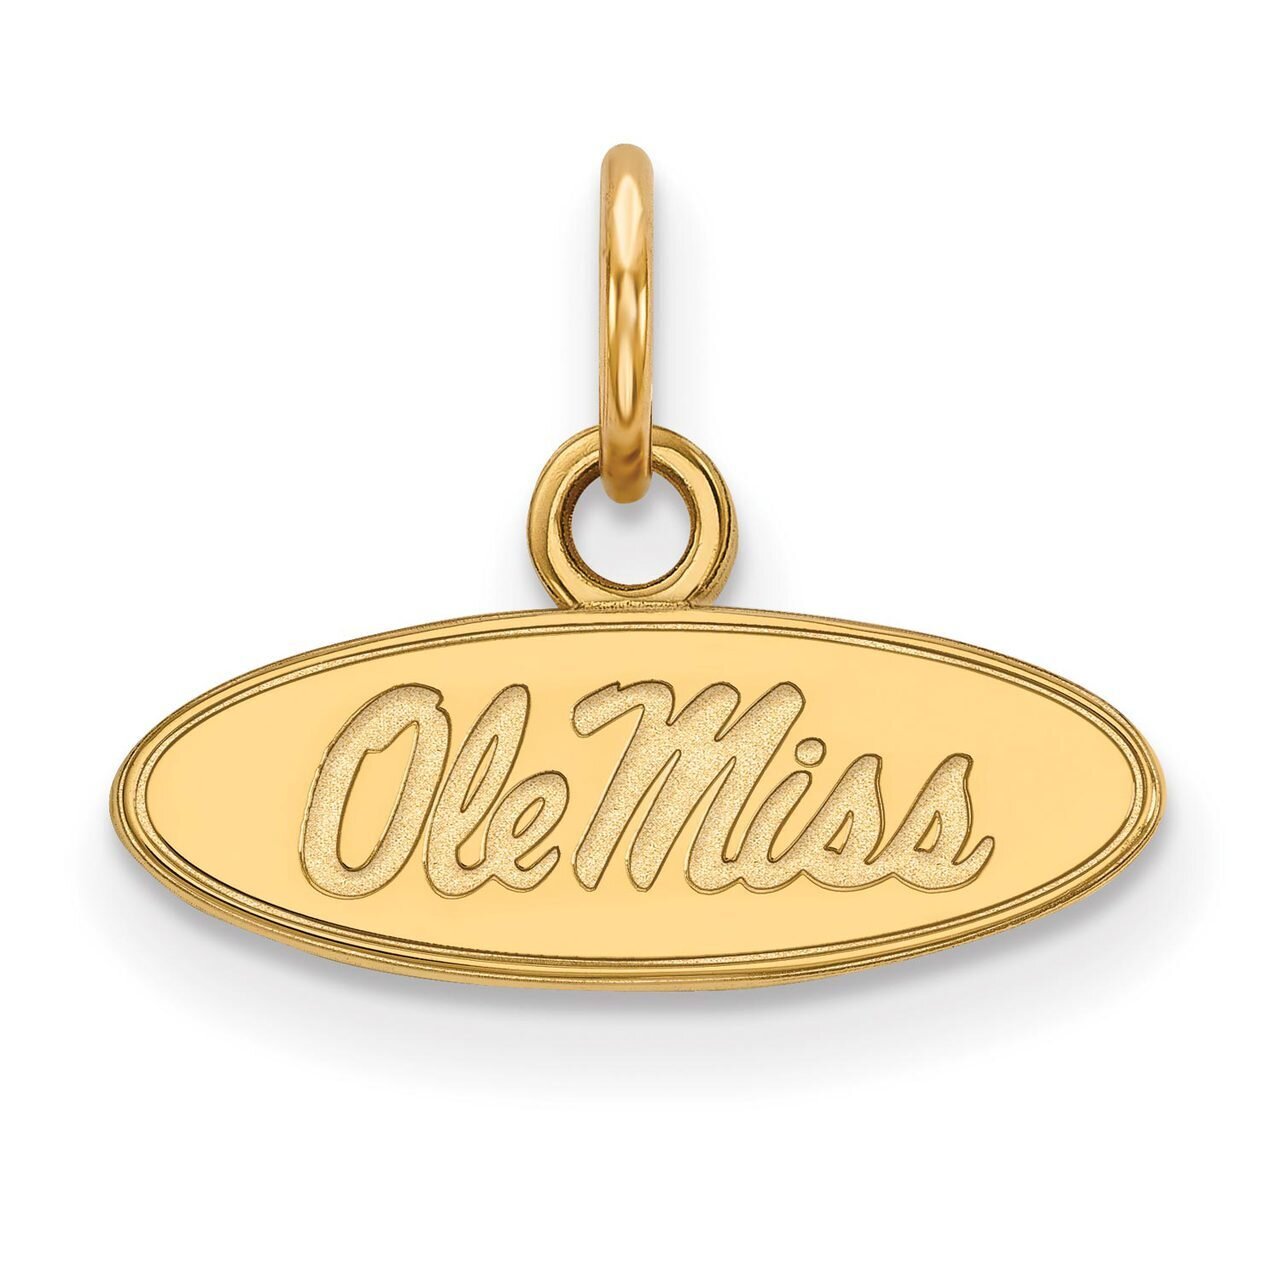 University of Mississippi x-Small Pendant 14k Yellow Gold 4Y001UMS